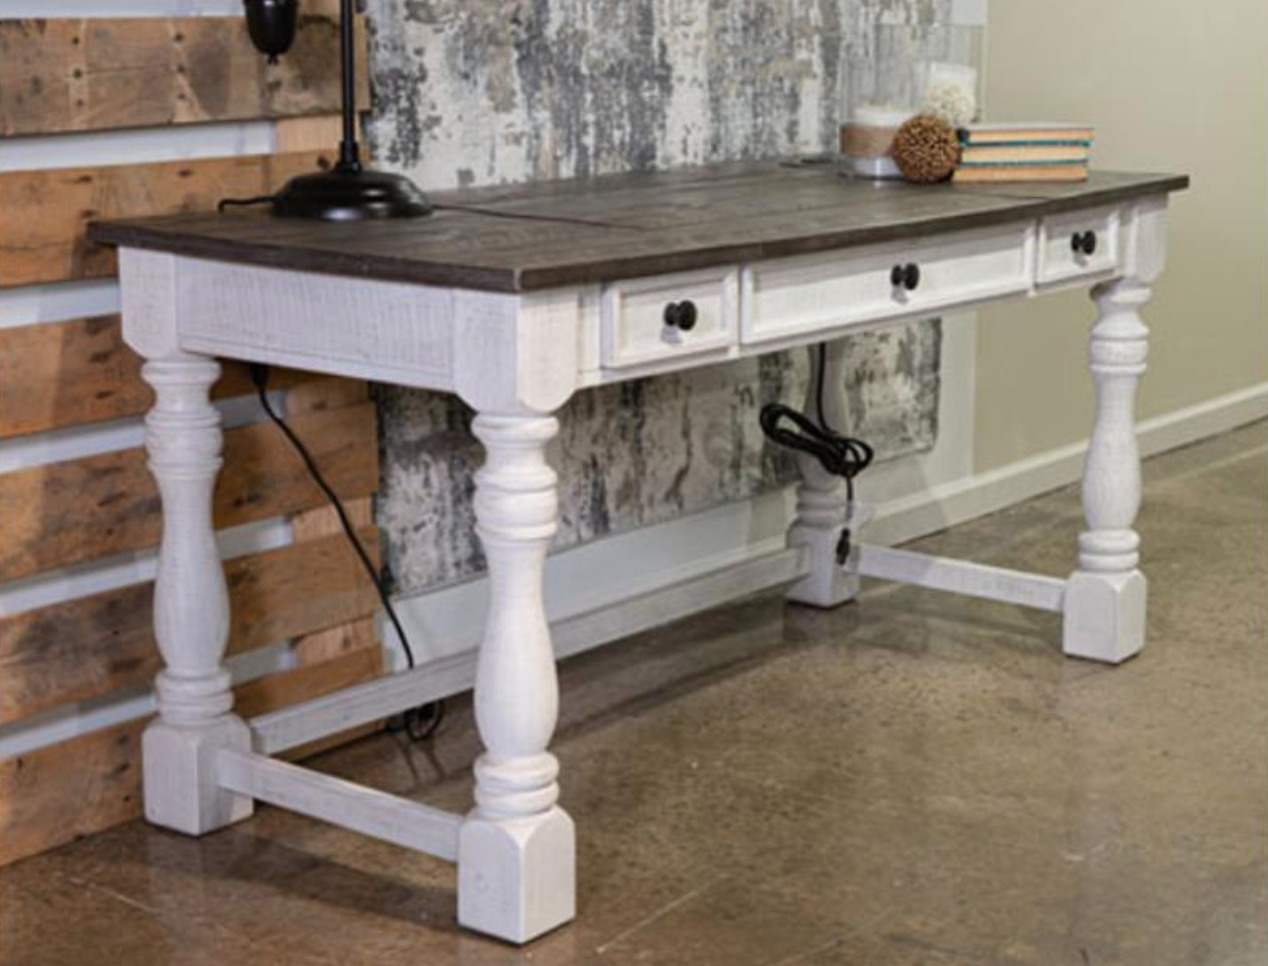 WEEKLY or MONTHLY. Lance Farmhouse Lift-Top Desk